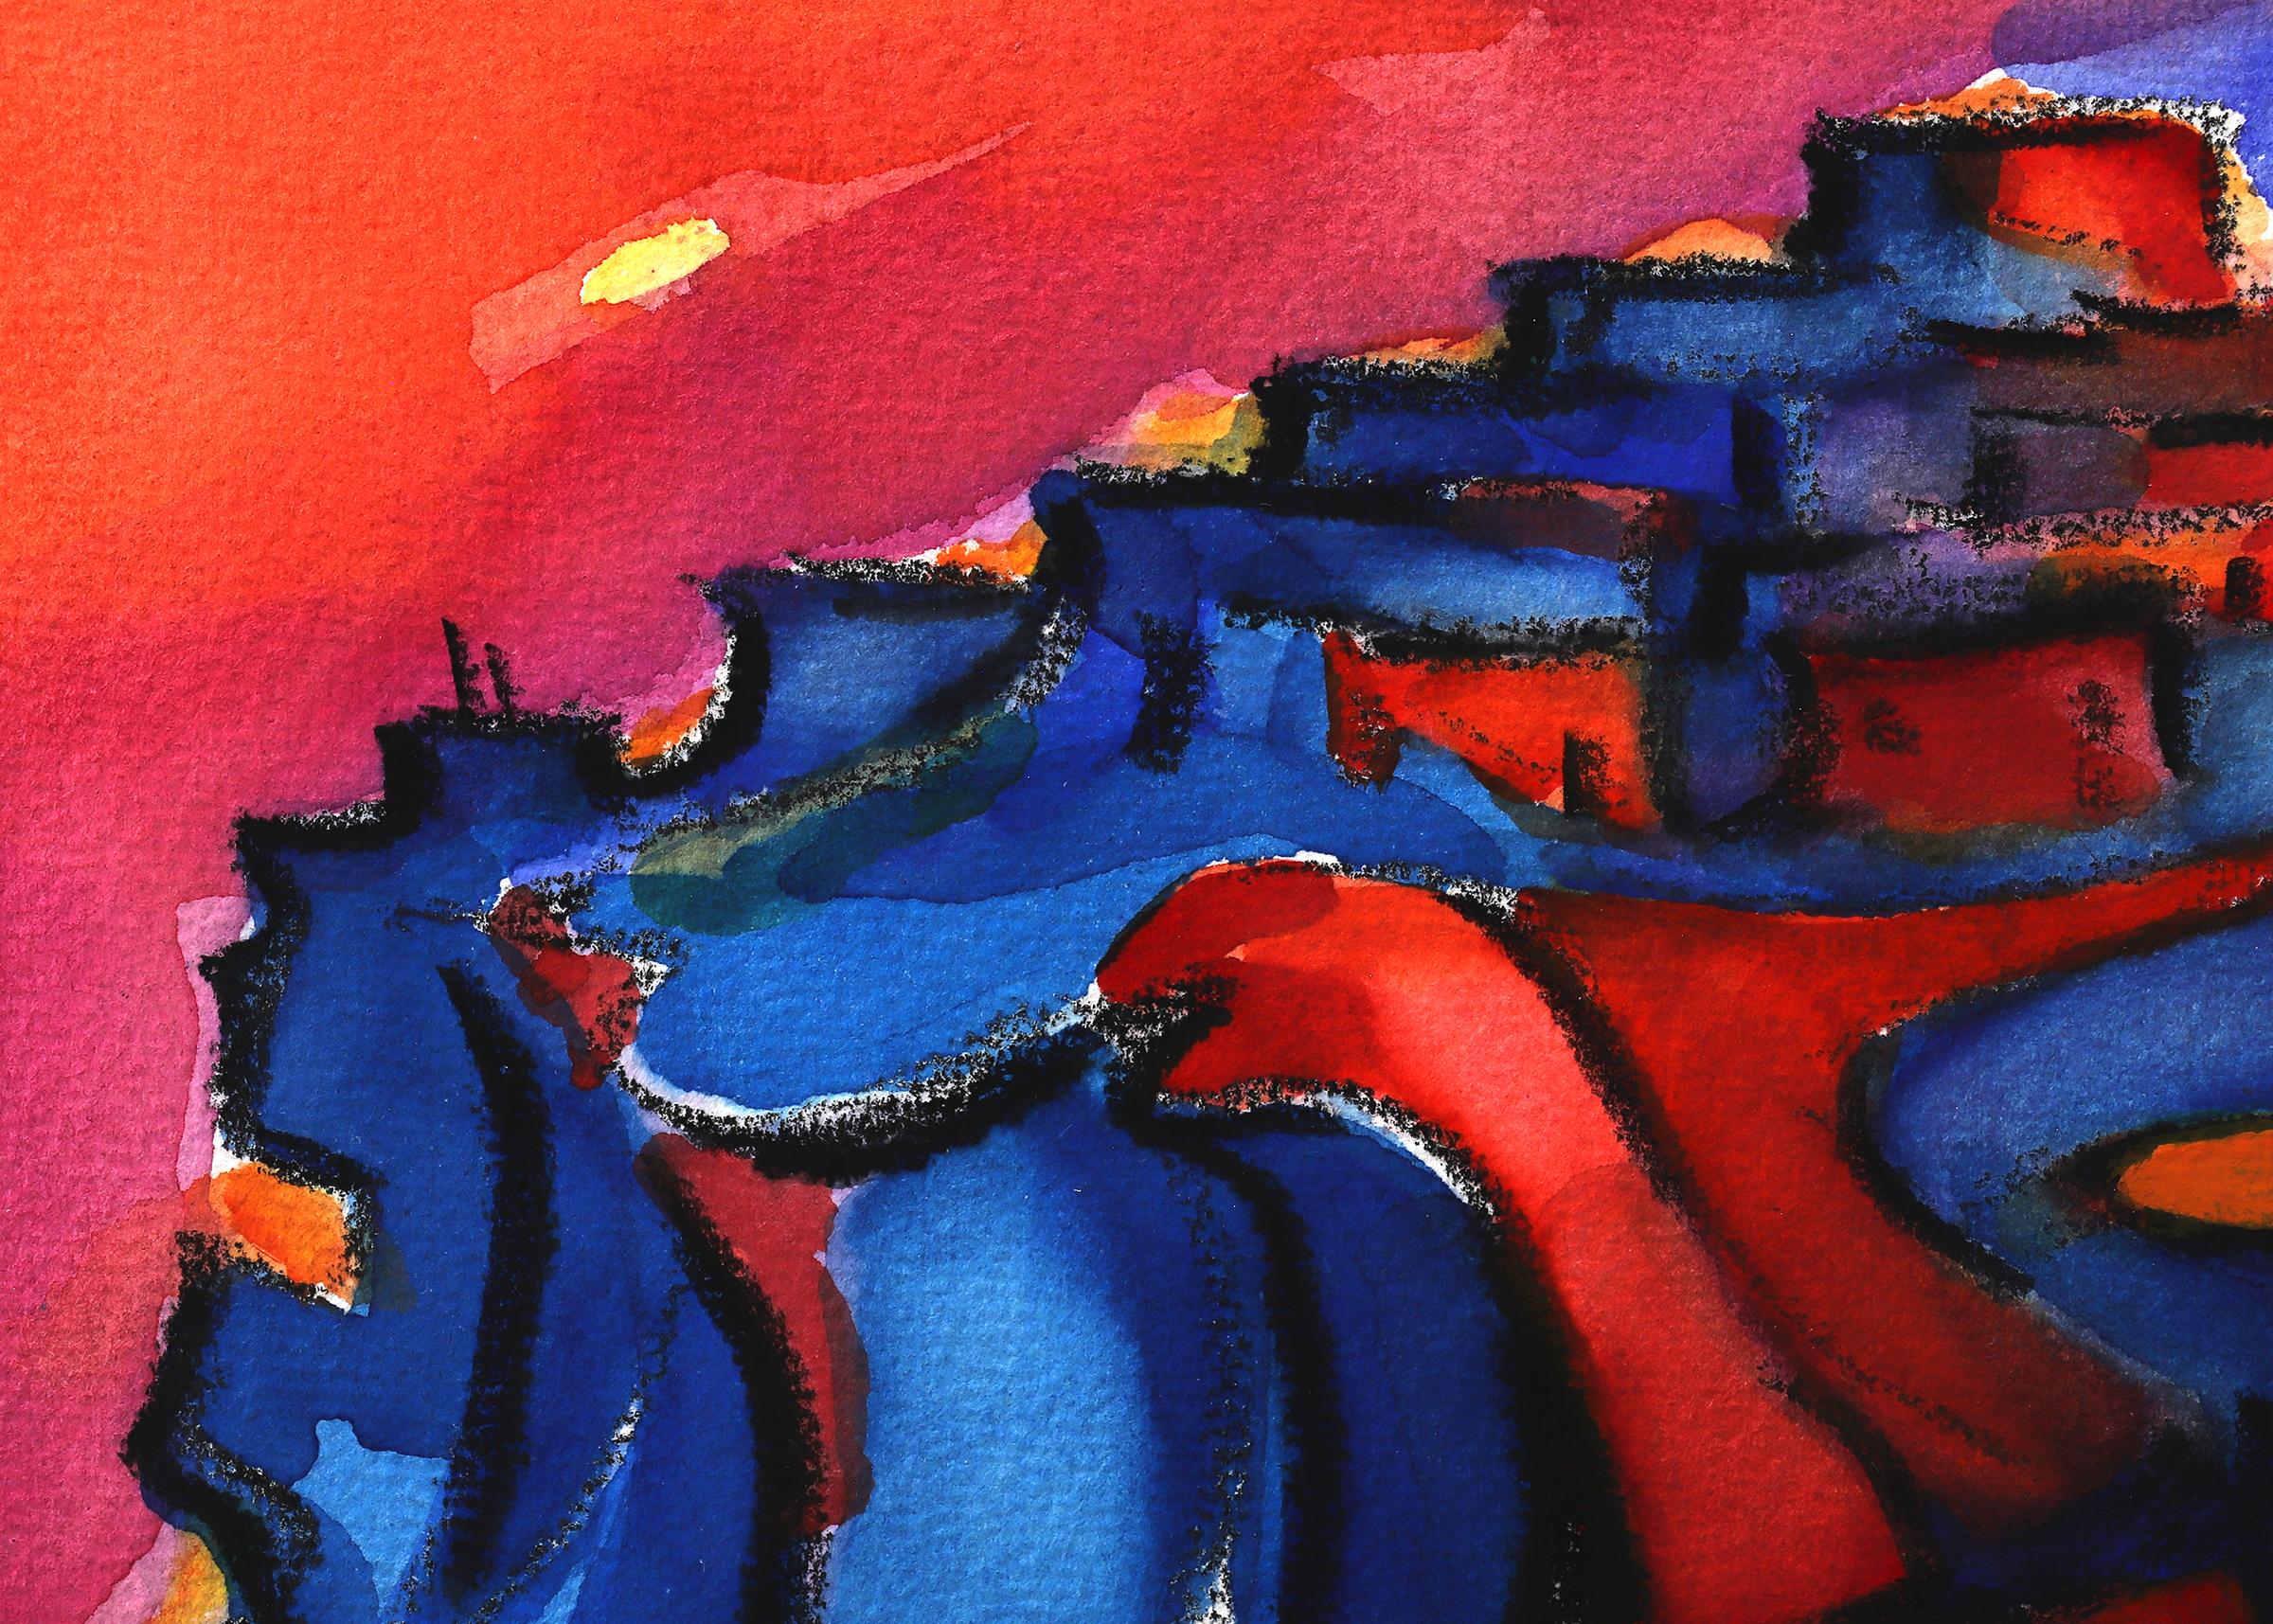 Watercolor, ink, and charcoal on paper titled 'Walpi #9 (Hopi Village on First Mesa, Arizona)' by Bert Van Bork (1928-2014). Painted in saturated shades of pink, blue, orange, and purples. Presented in a custom frame with all archival materials